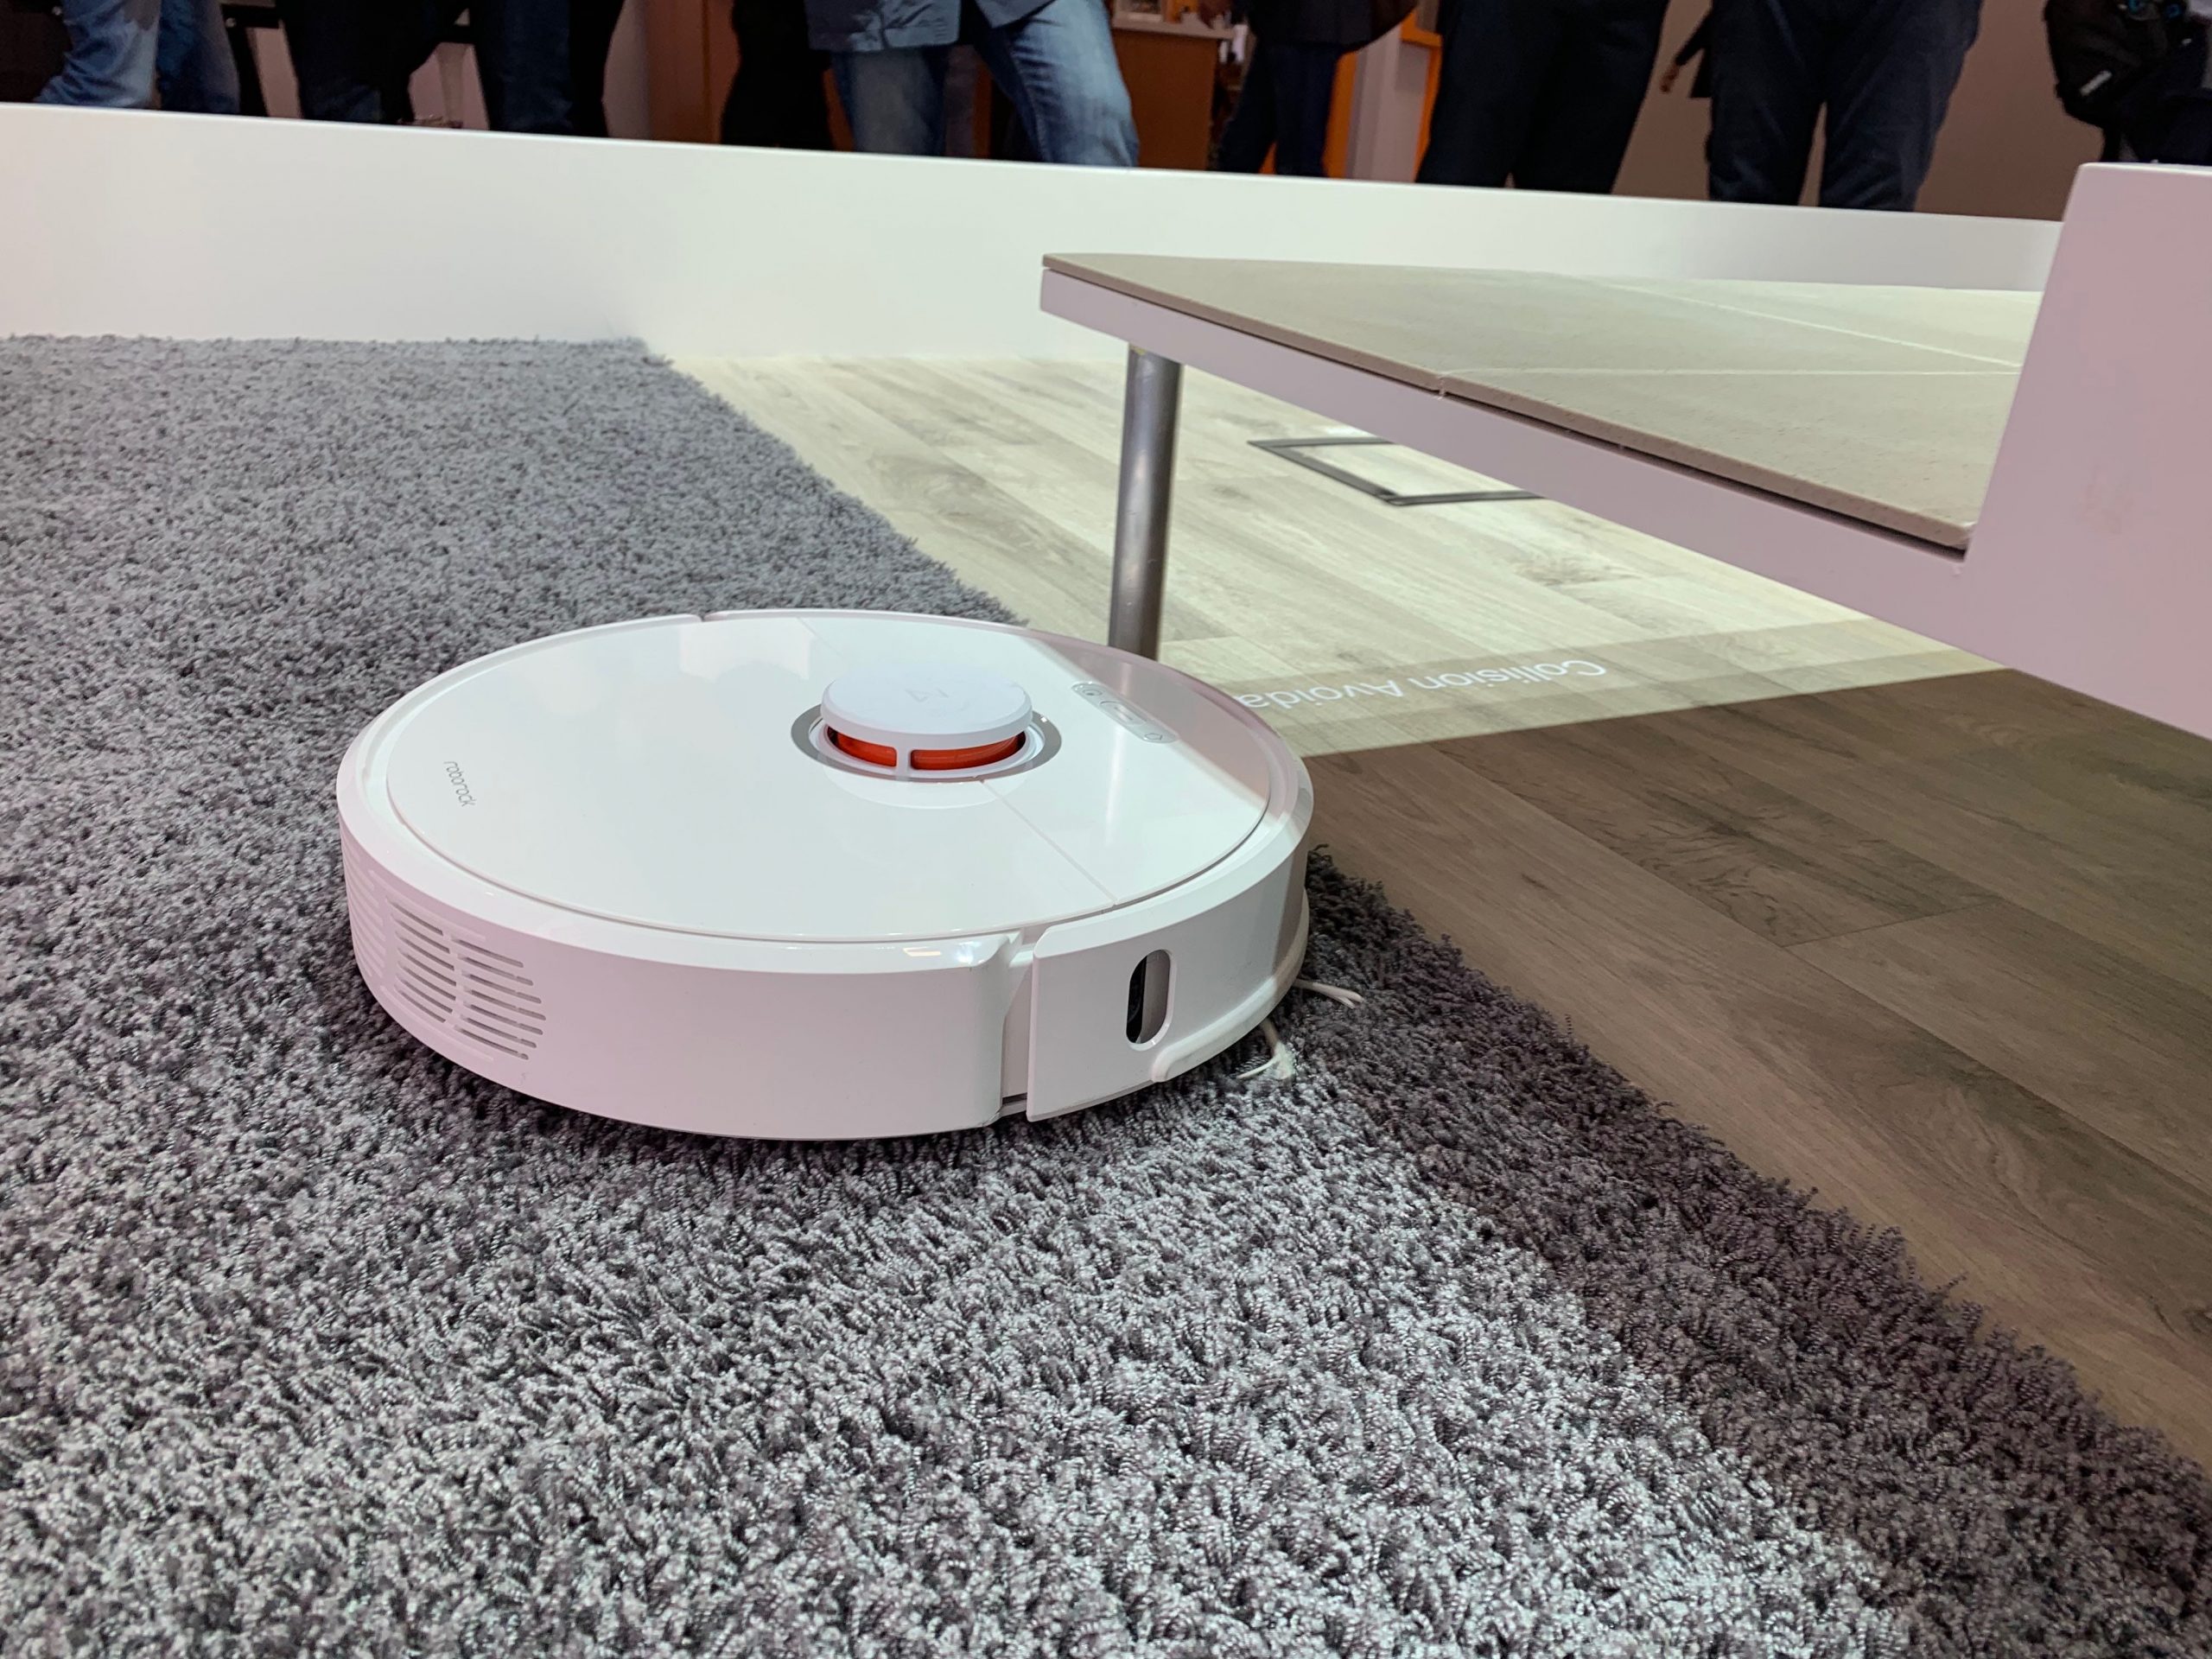 image of the roborock s6 our pick for the best robot vacuum 2021 cleaning under a table